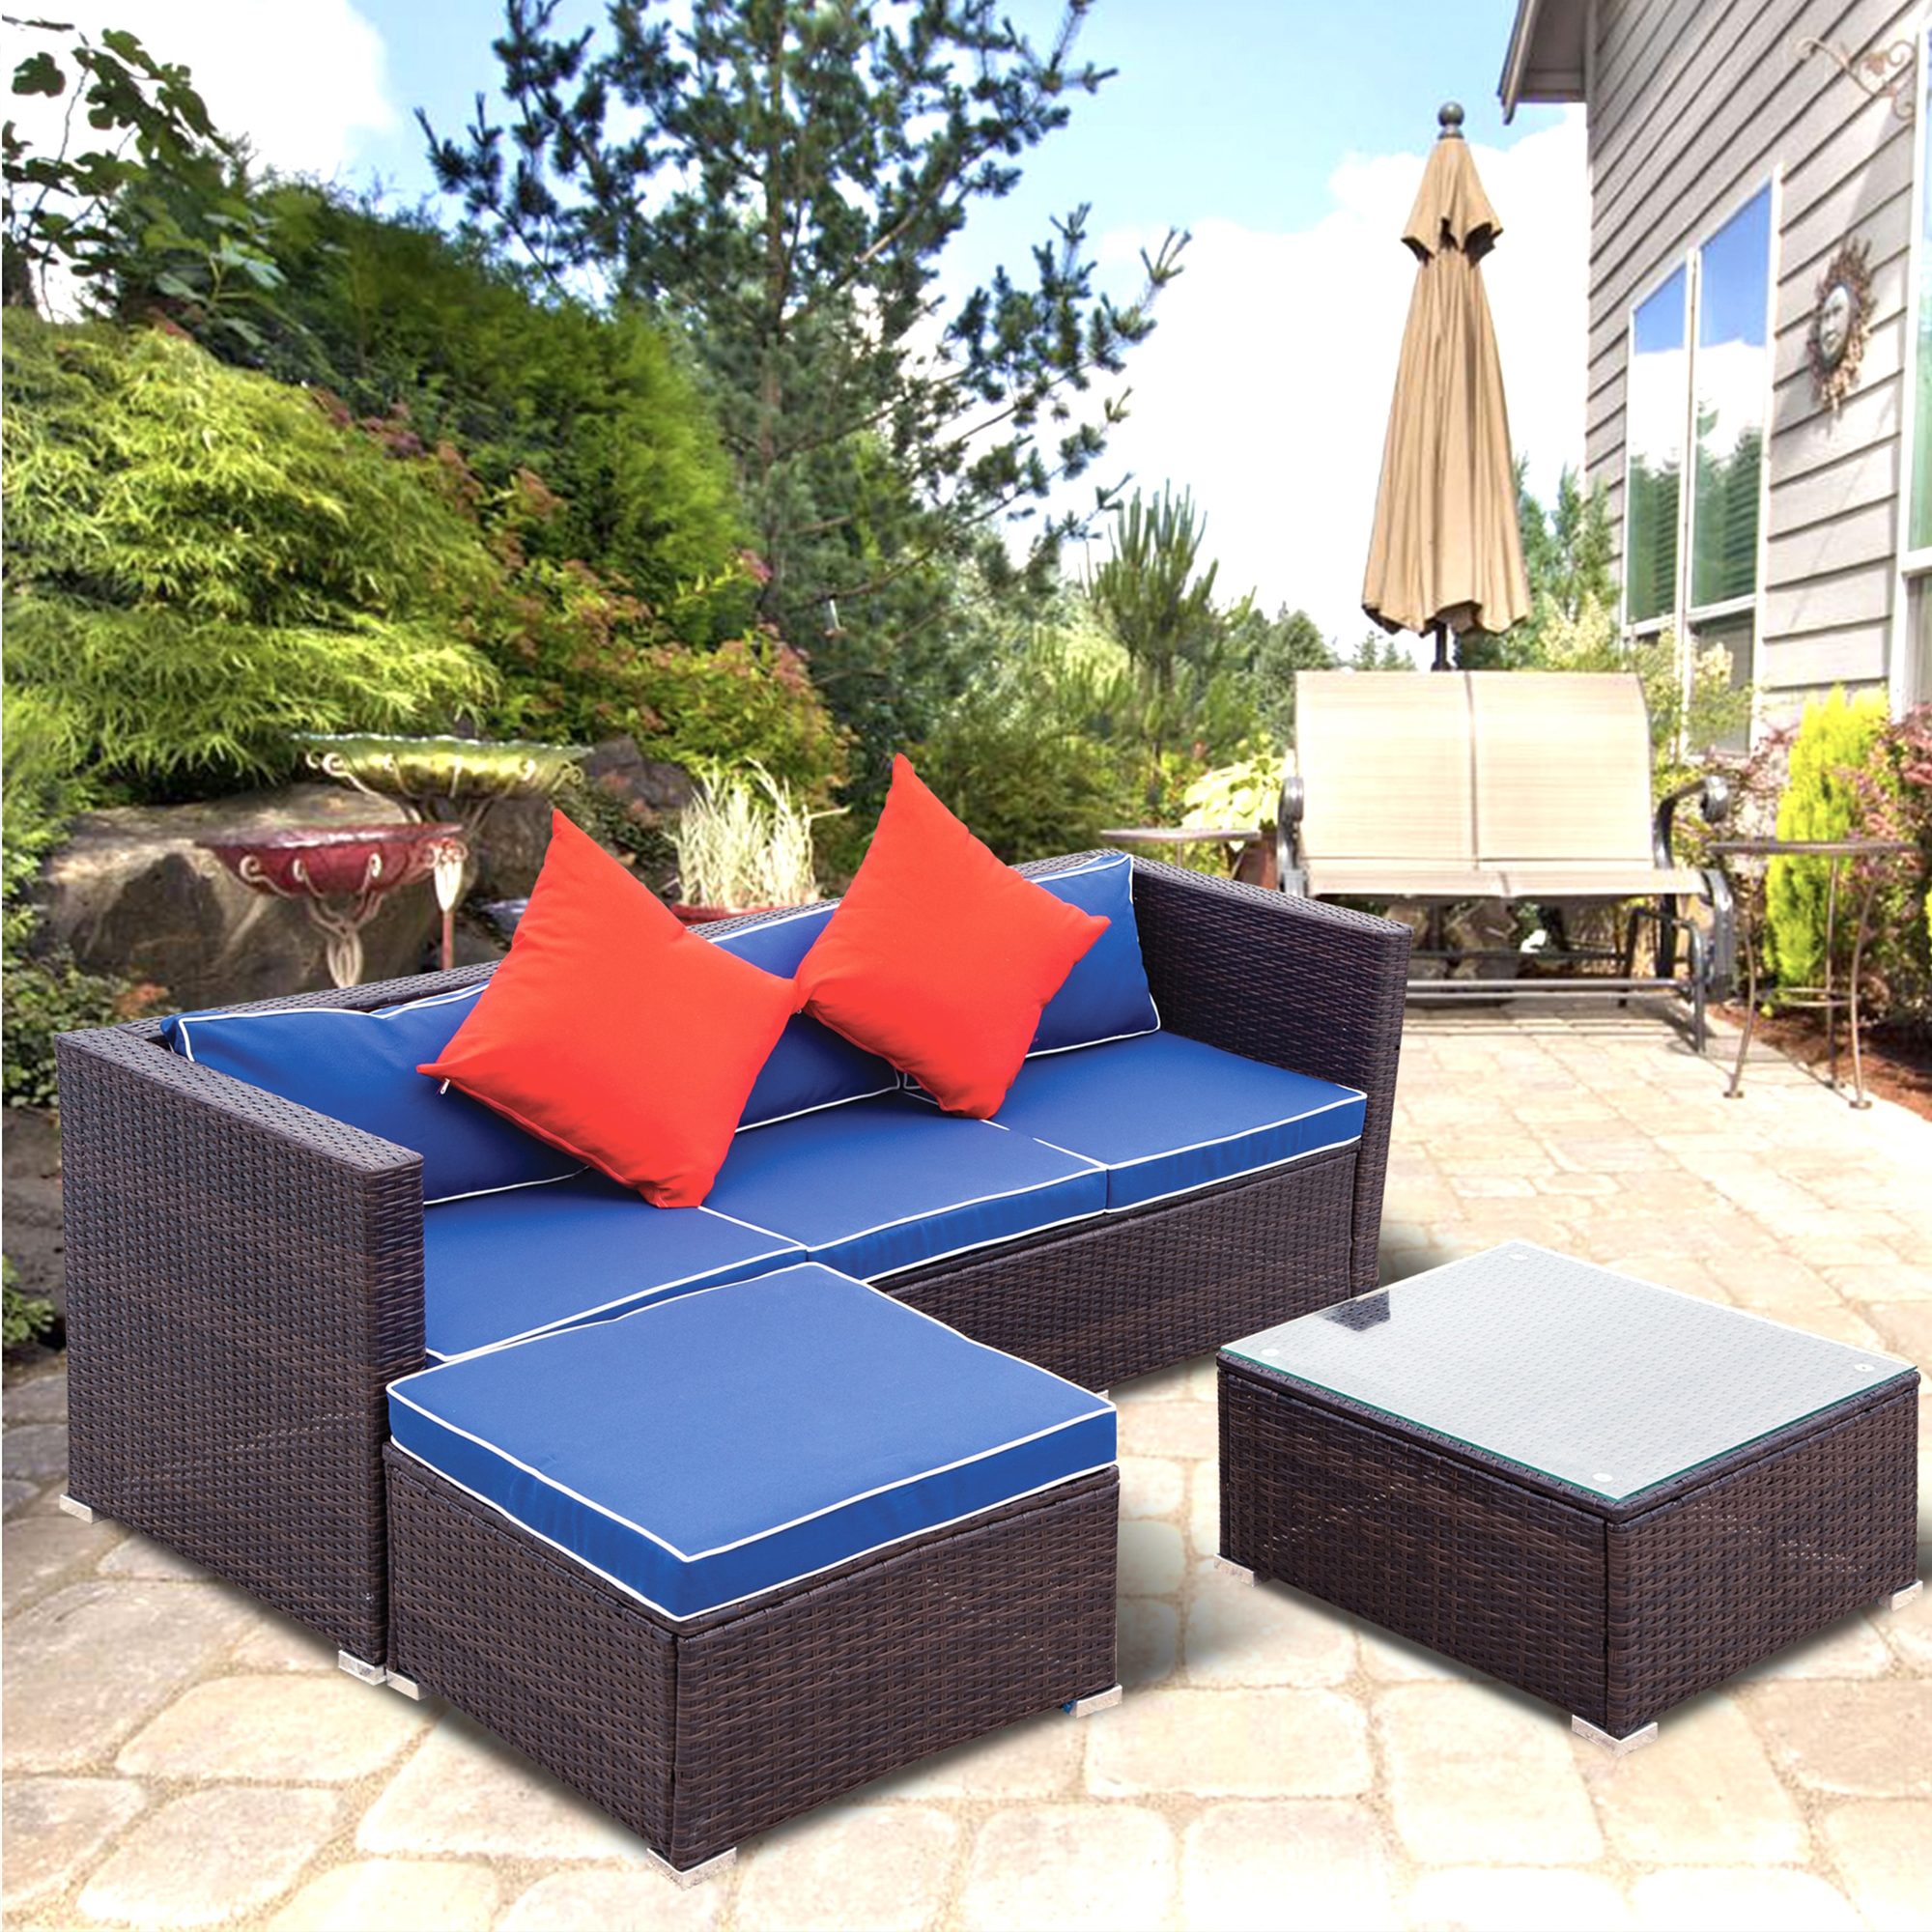 Outdoor Patio Furniture Sets, 3 Piece Ratten Wicker Sectional Sofa Set, Patio Furniture with 3-Seating Sofa, 1 Ottoman & Coffee Table, Patio Conversation Sets for Backyard Lawn Garden, Blue, W10965 - image 1 of 11